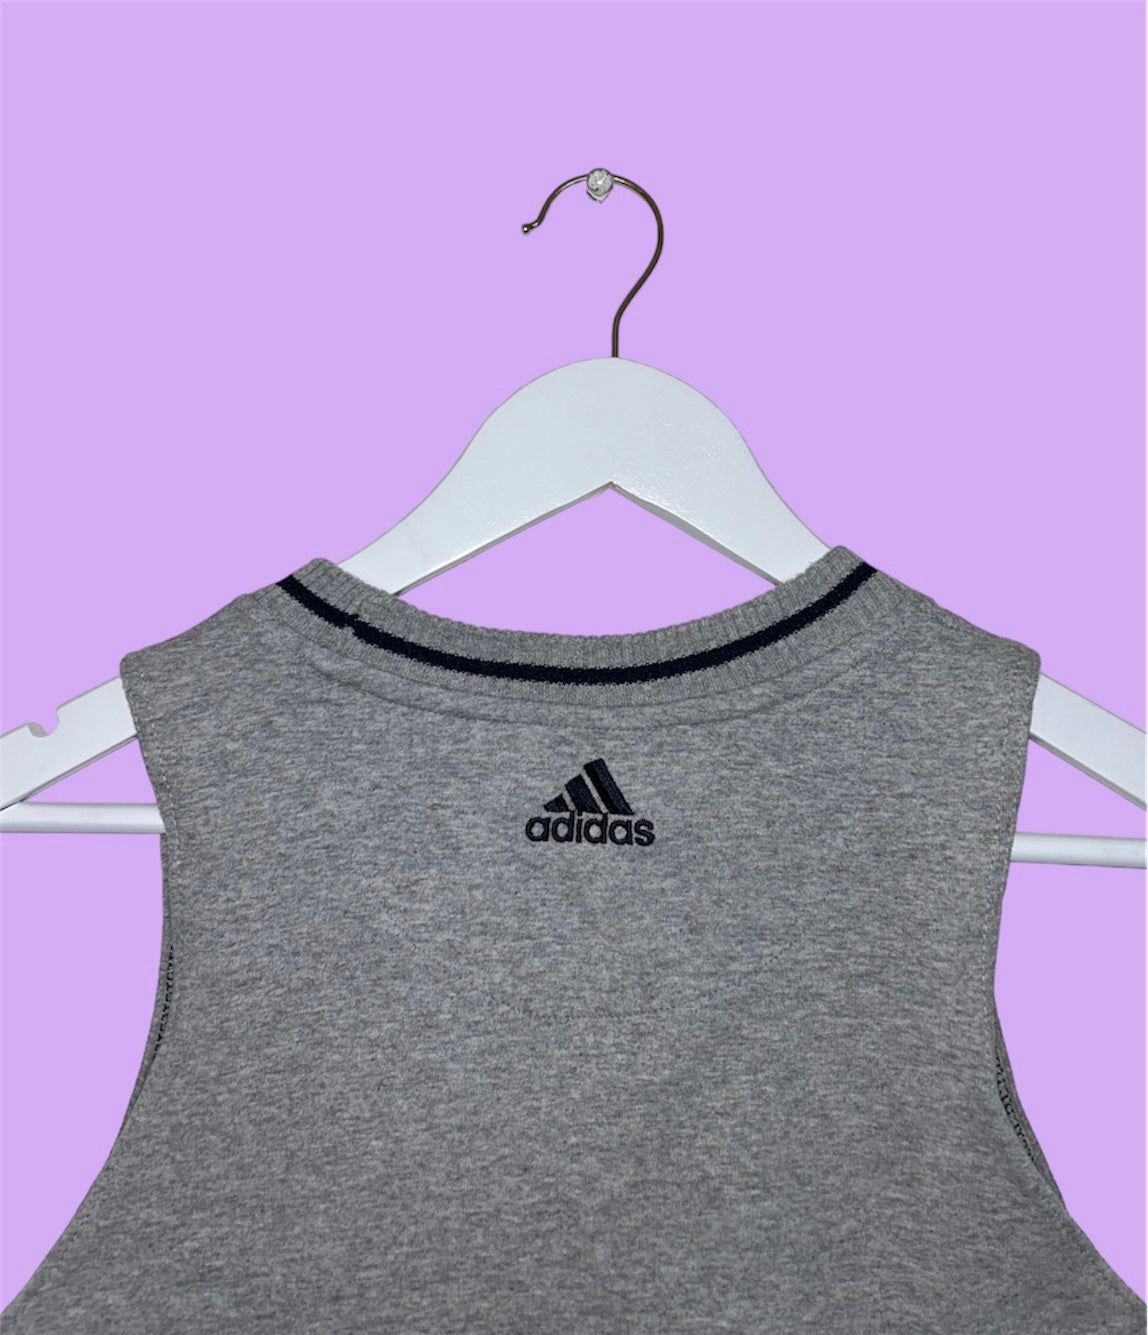 back of grey sleeveless crop top with small adidas logo shown on a lilac background